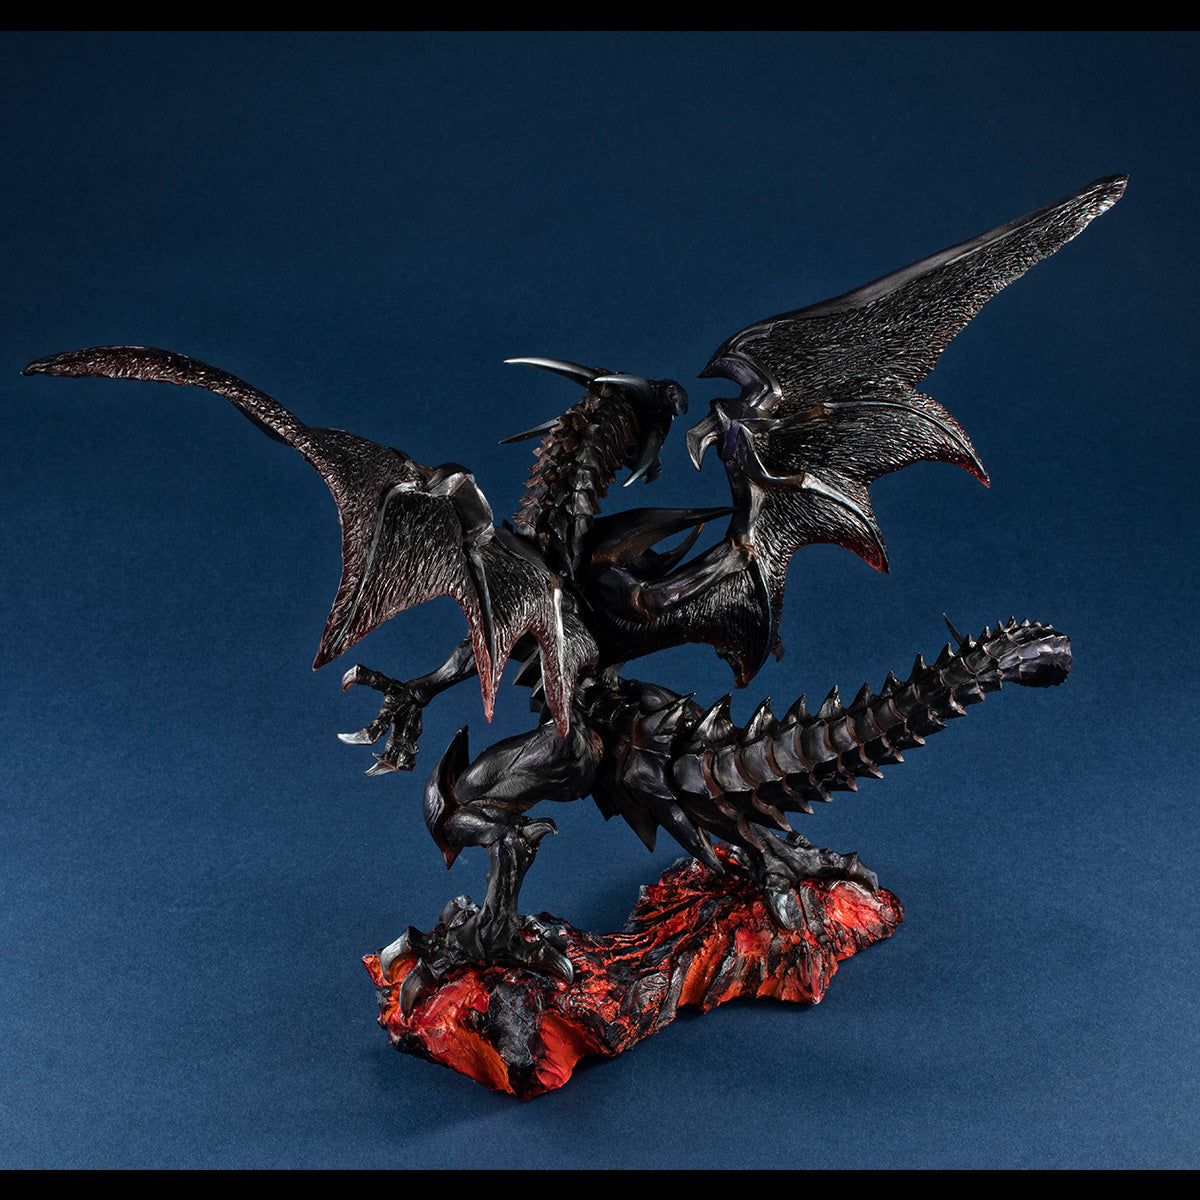 Red Eyes Black Dragon Art Works Monsters, Yu-Gi-Oh! Duel Monsters franchise, MegaHouse brand, Release Date: 30. Jun 2021, General type, Nippon Figures store.